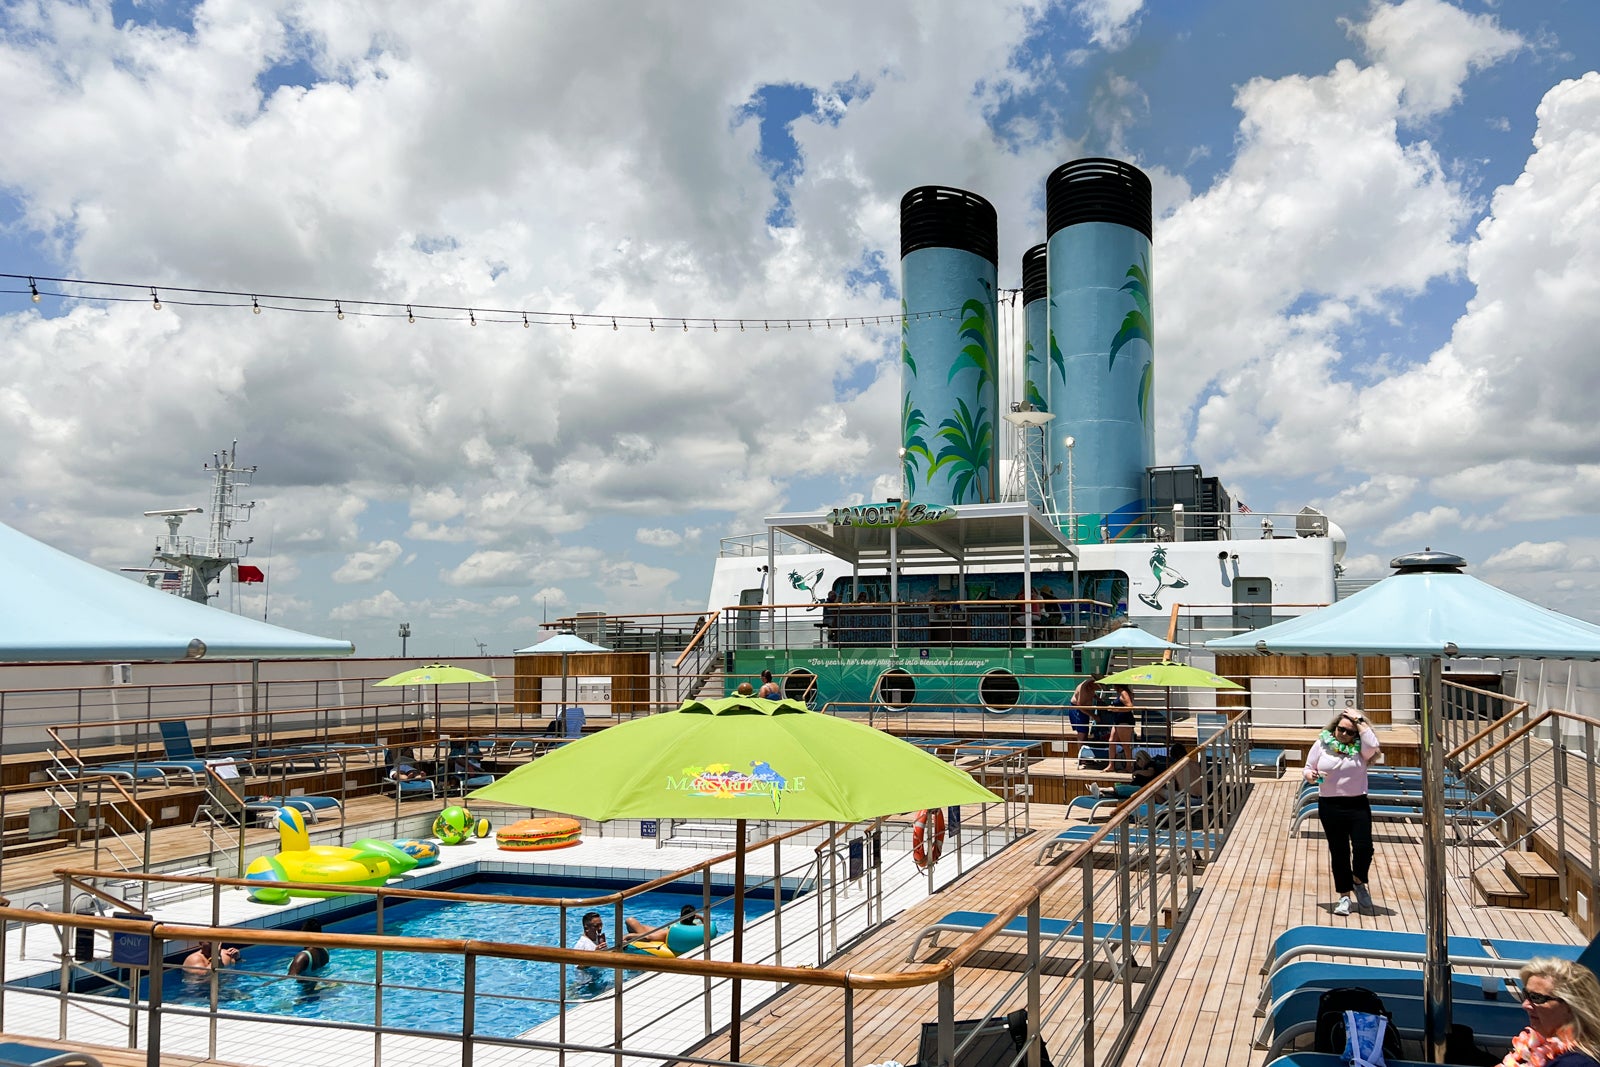 Margaritaville at Sea sets sail on choppy waters Why you should wait